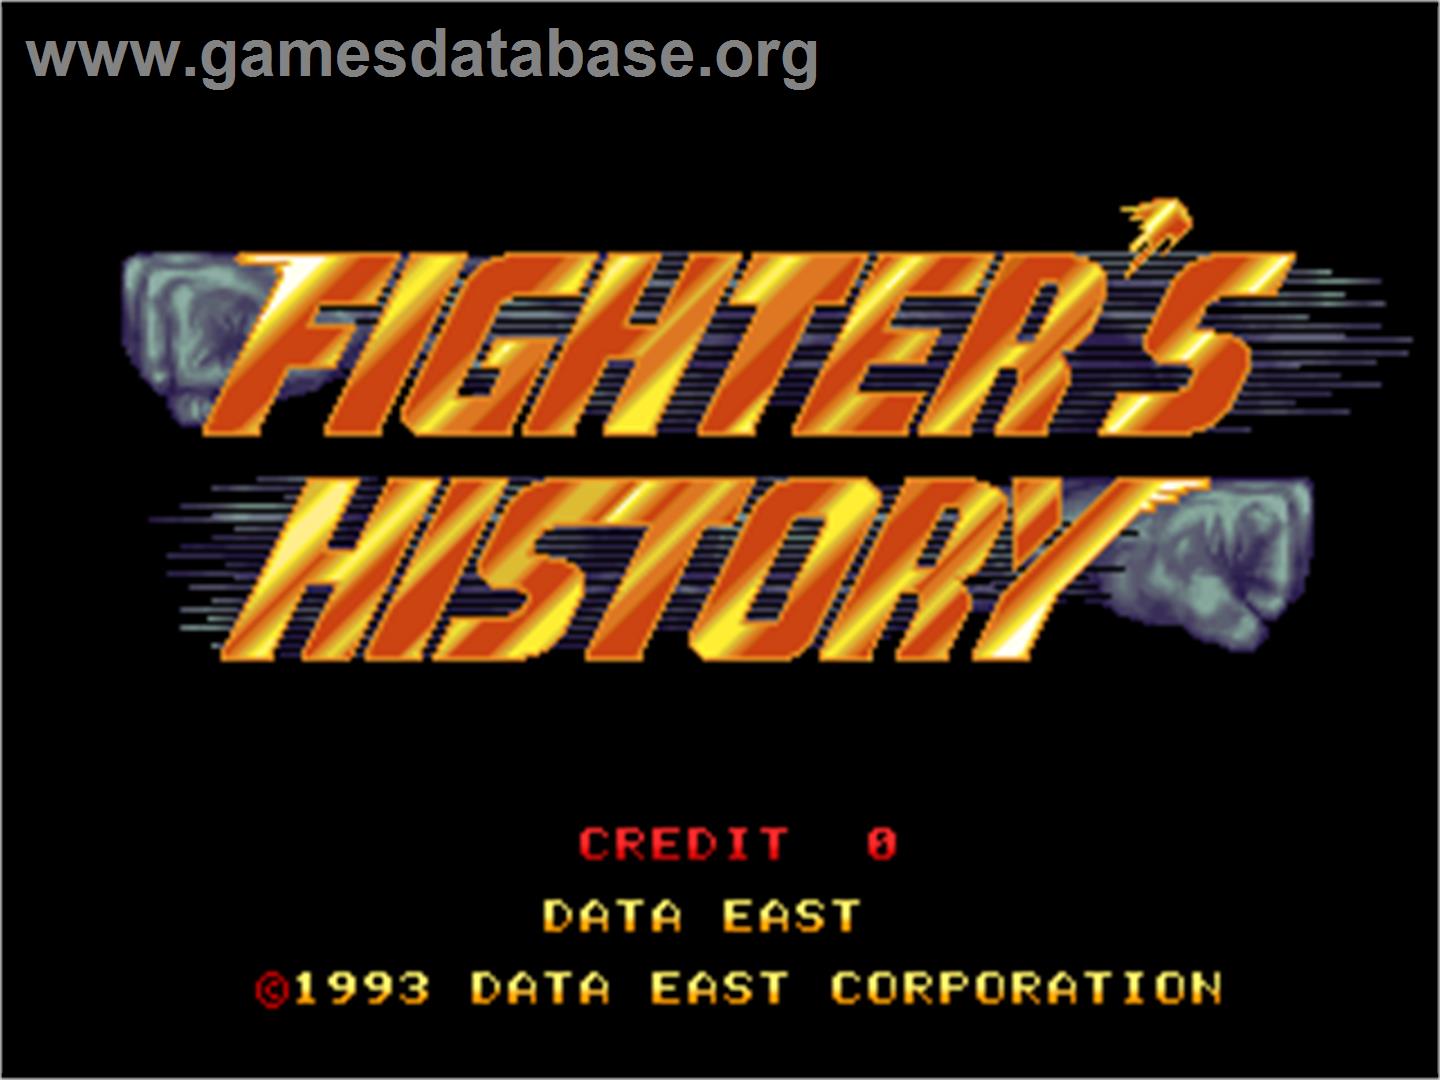 Fighter's History - Arcade - Artwork - Title Screen